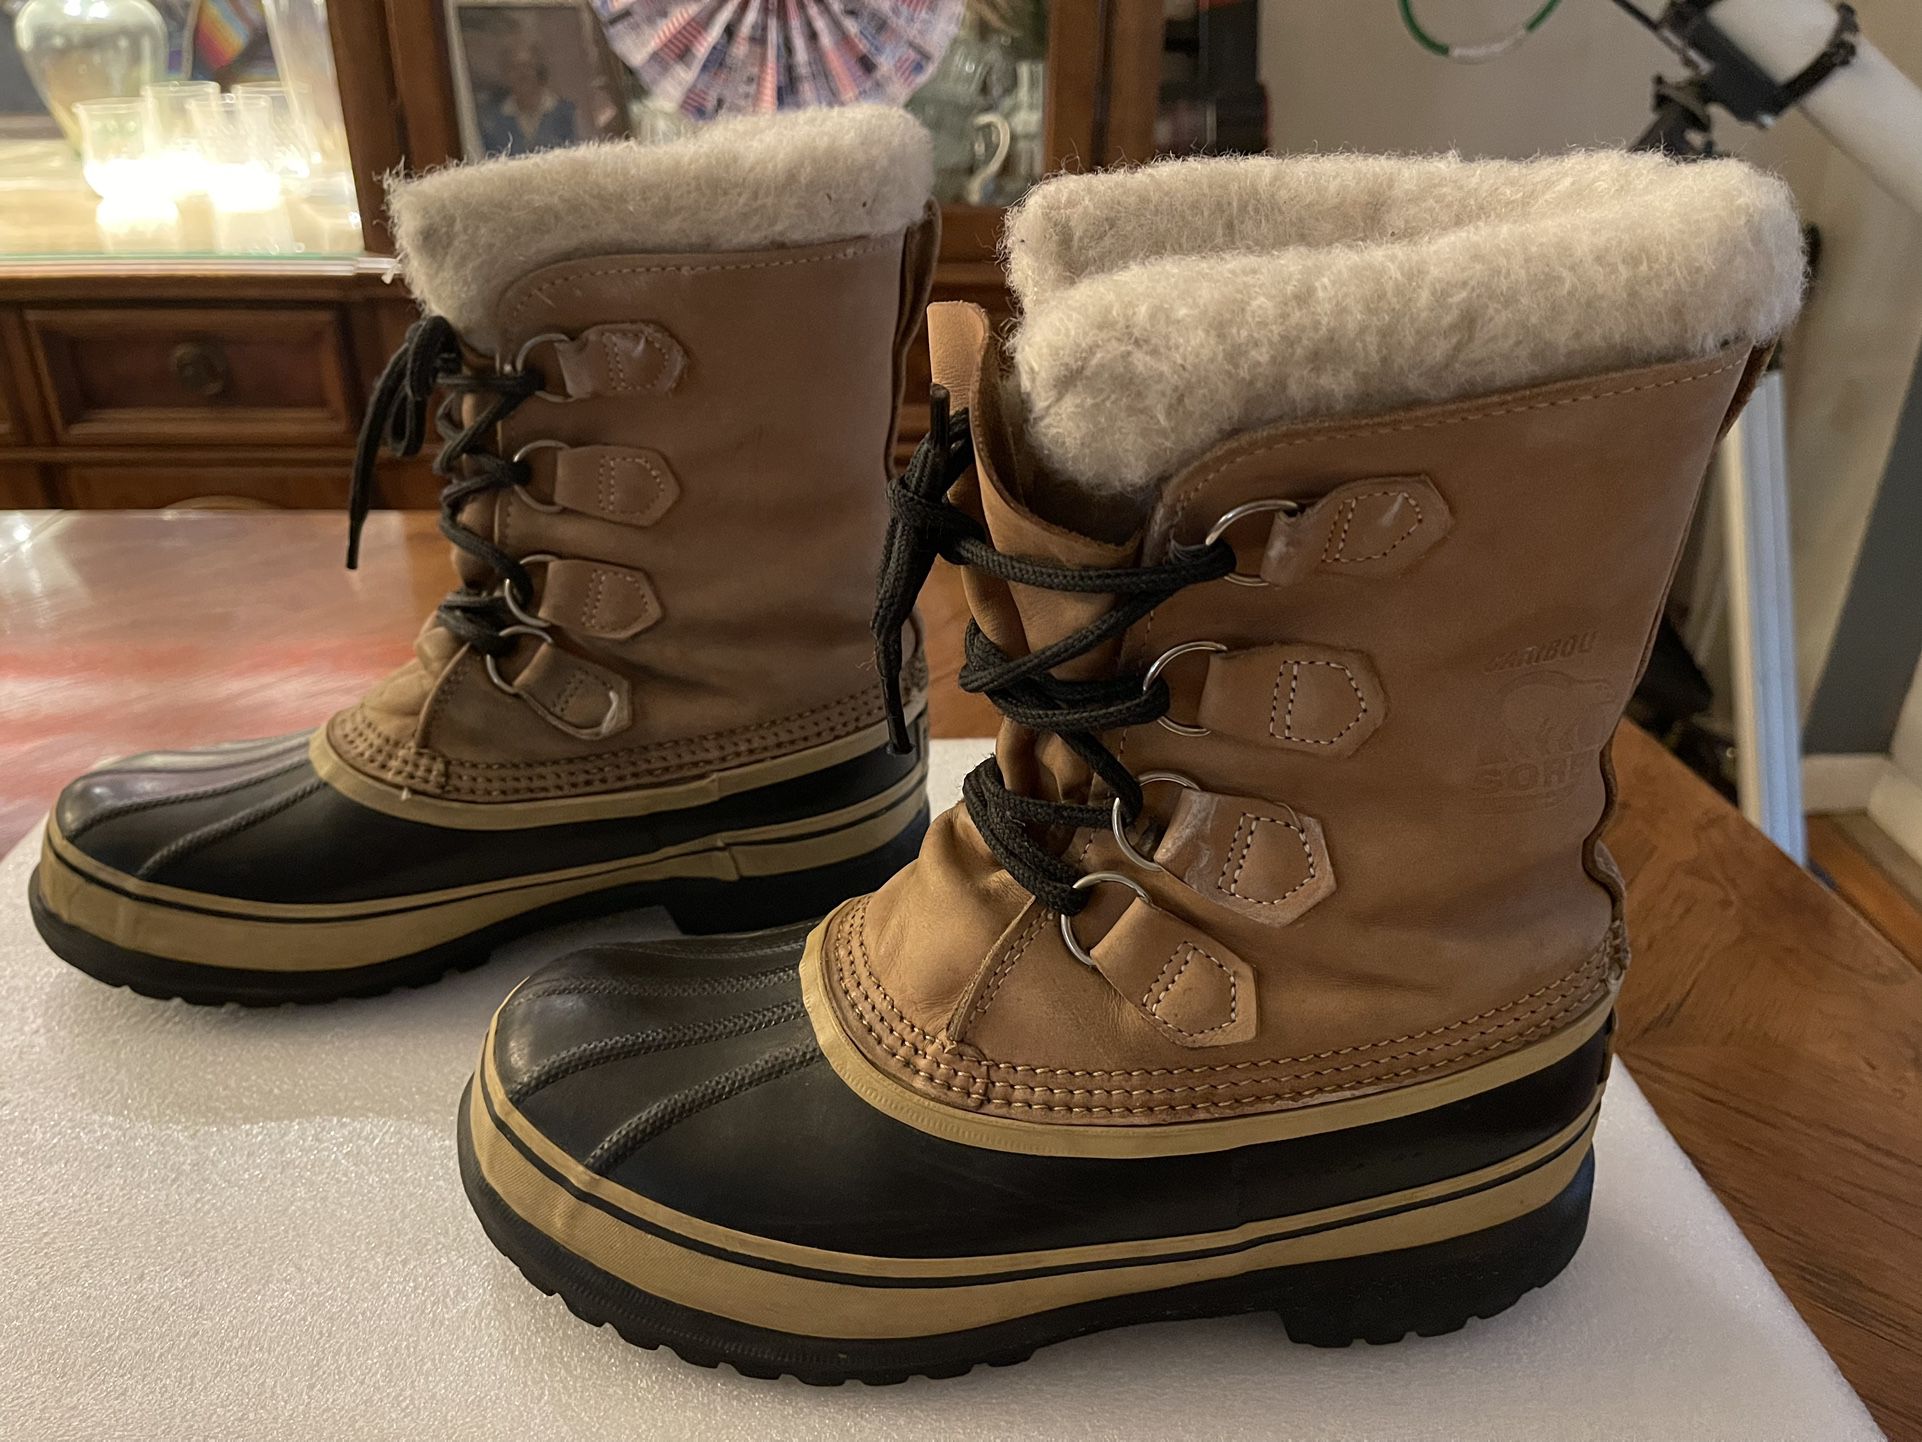 Hand Crafted Sorel Winter Boots - Made in Canada - Caribou - Natural Rubber